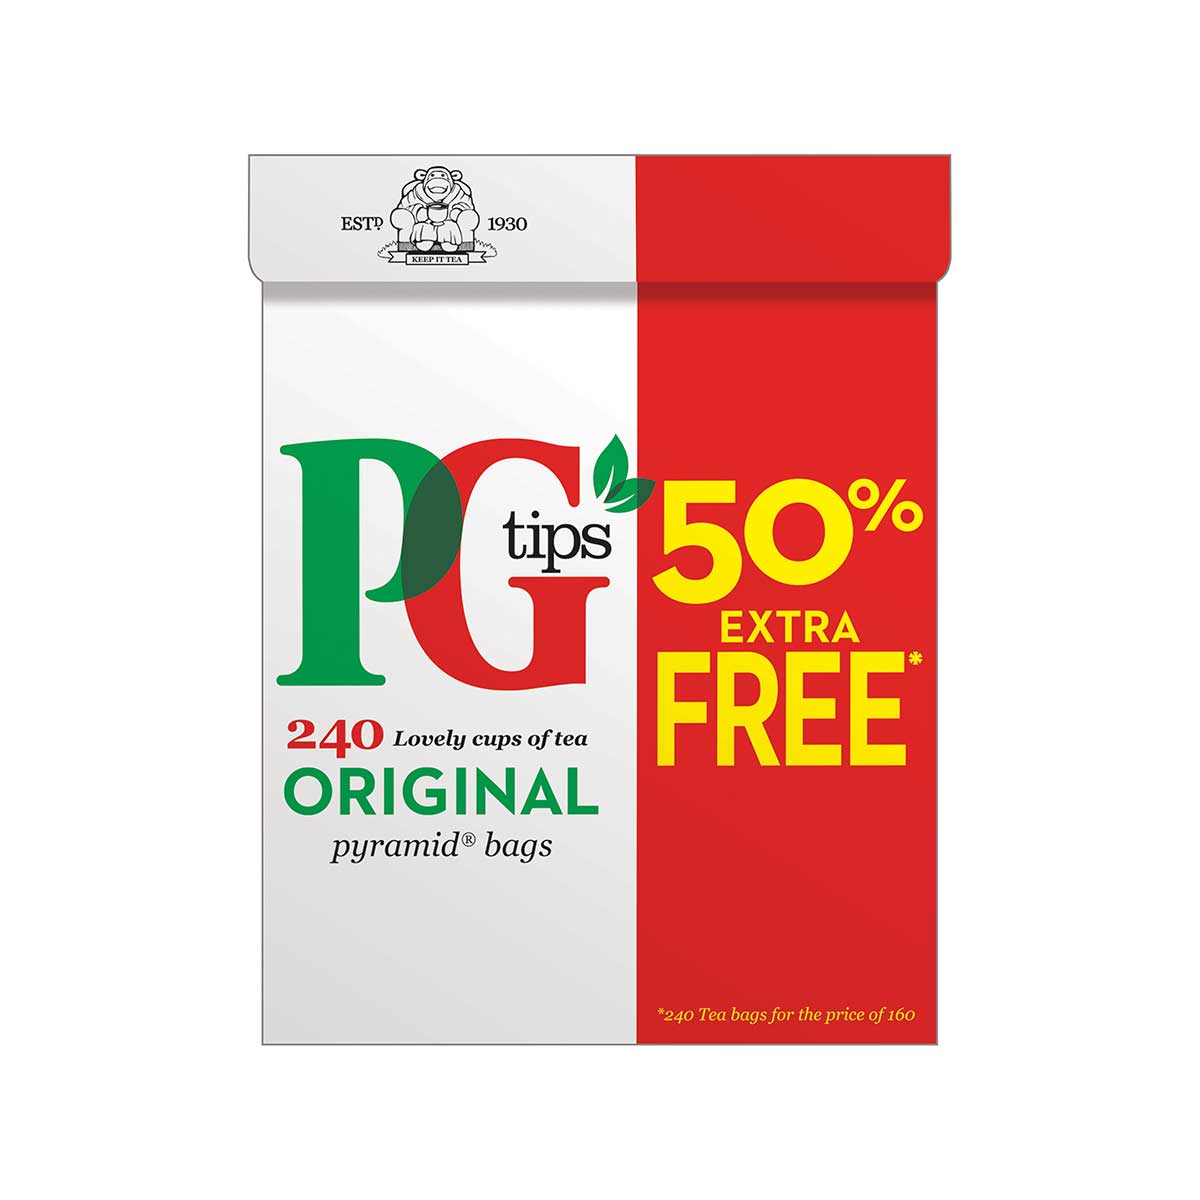 Lipton Teas and Infusions brews up revamp for PG Tips | Product News |  Convenience Store